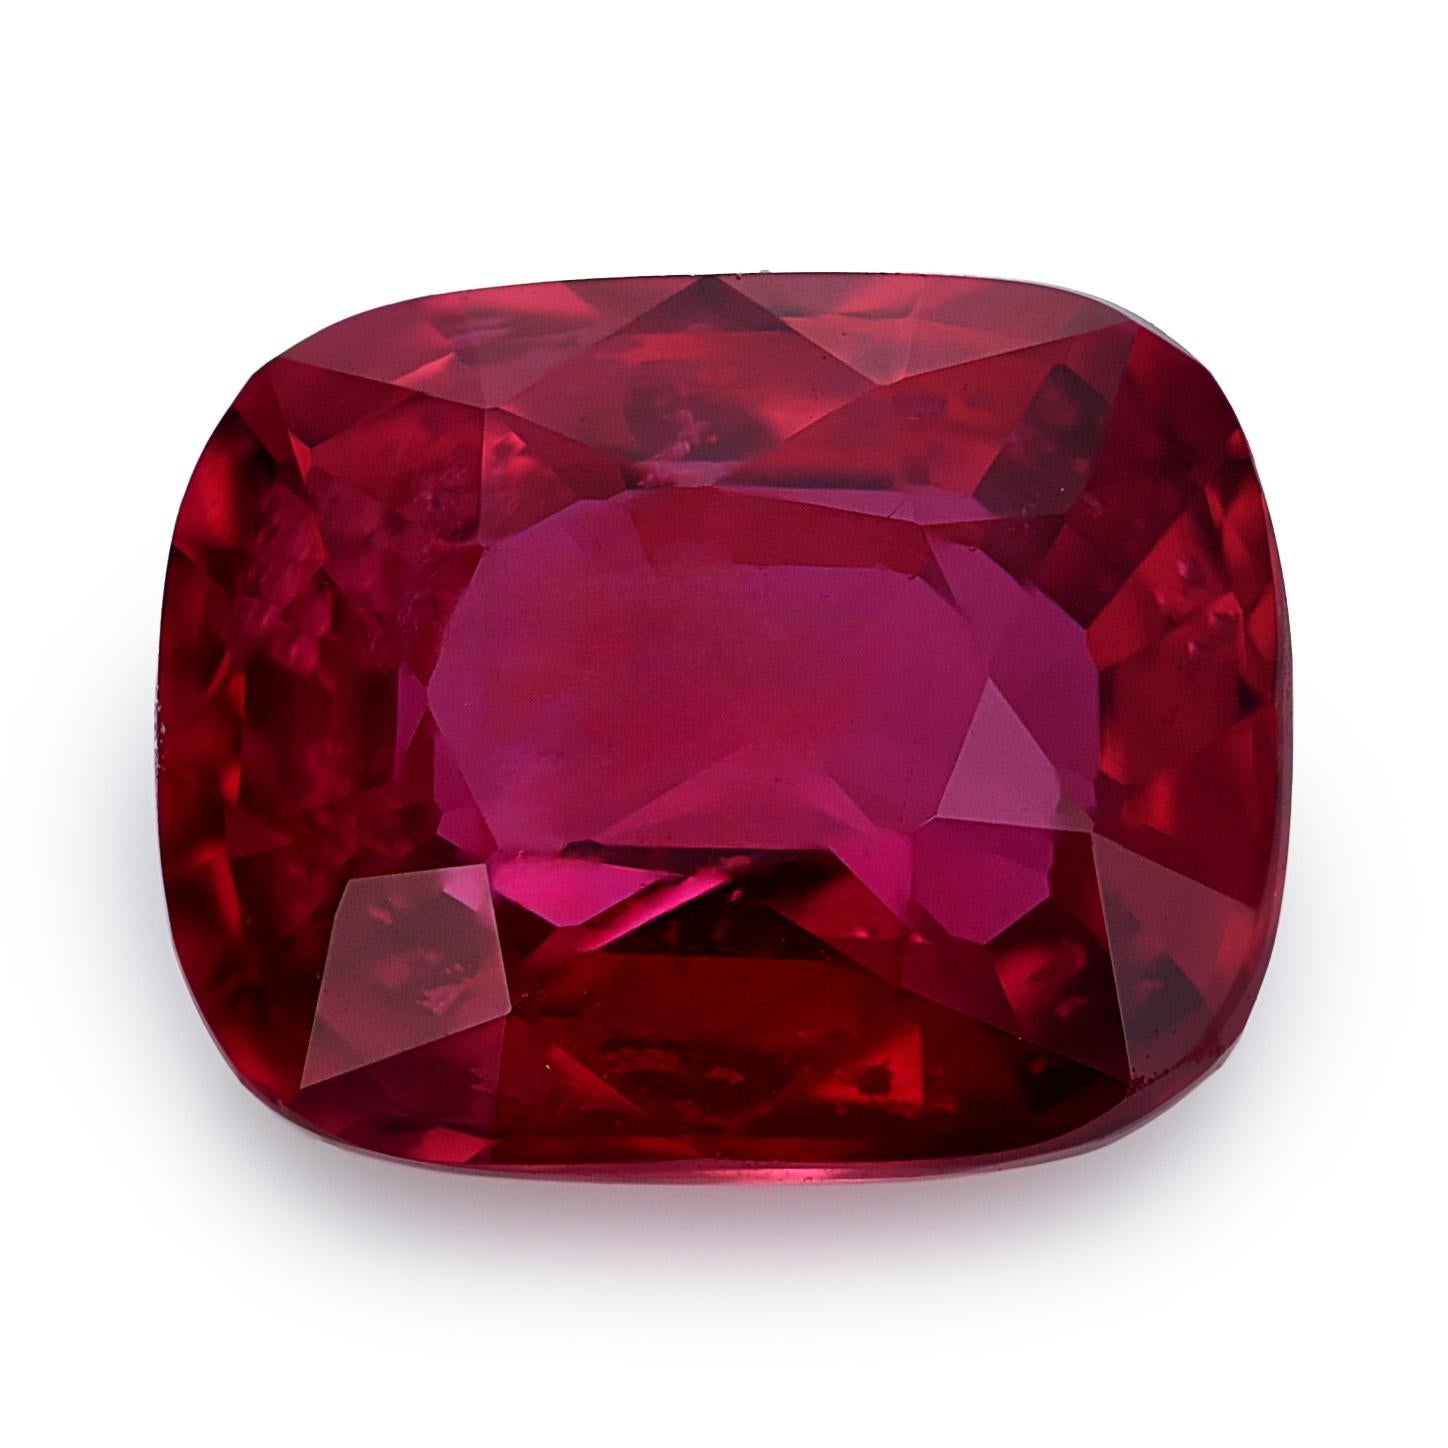 Women's or Men's GIA Certified 1.31 Carats Unheated Mozambique Ruby For Sale